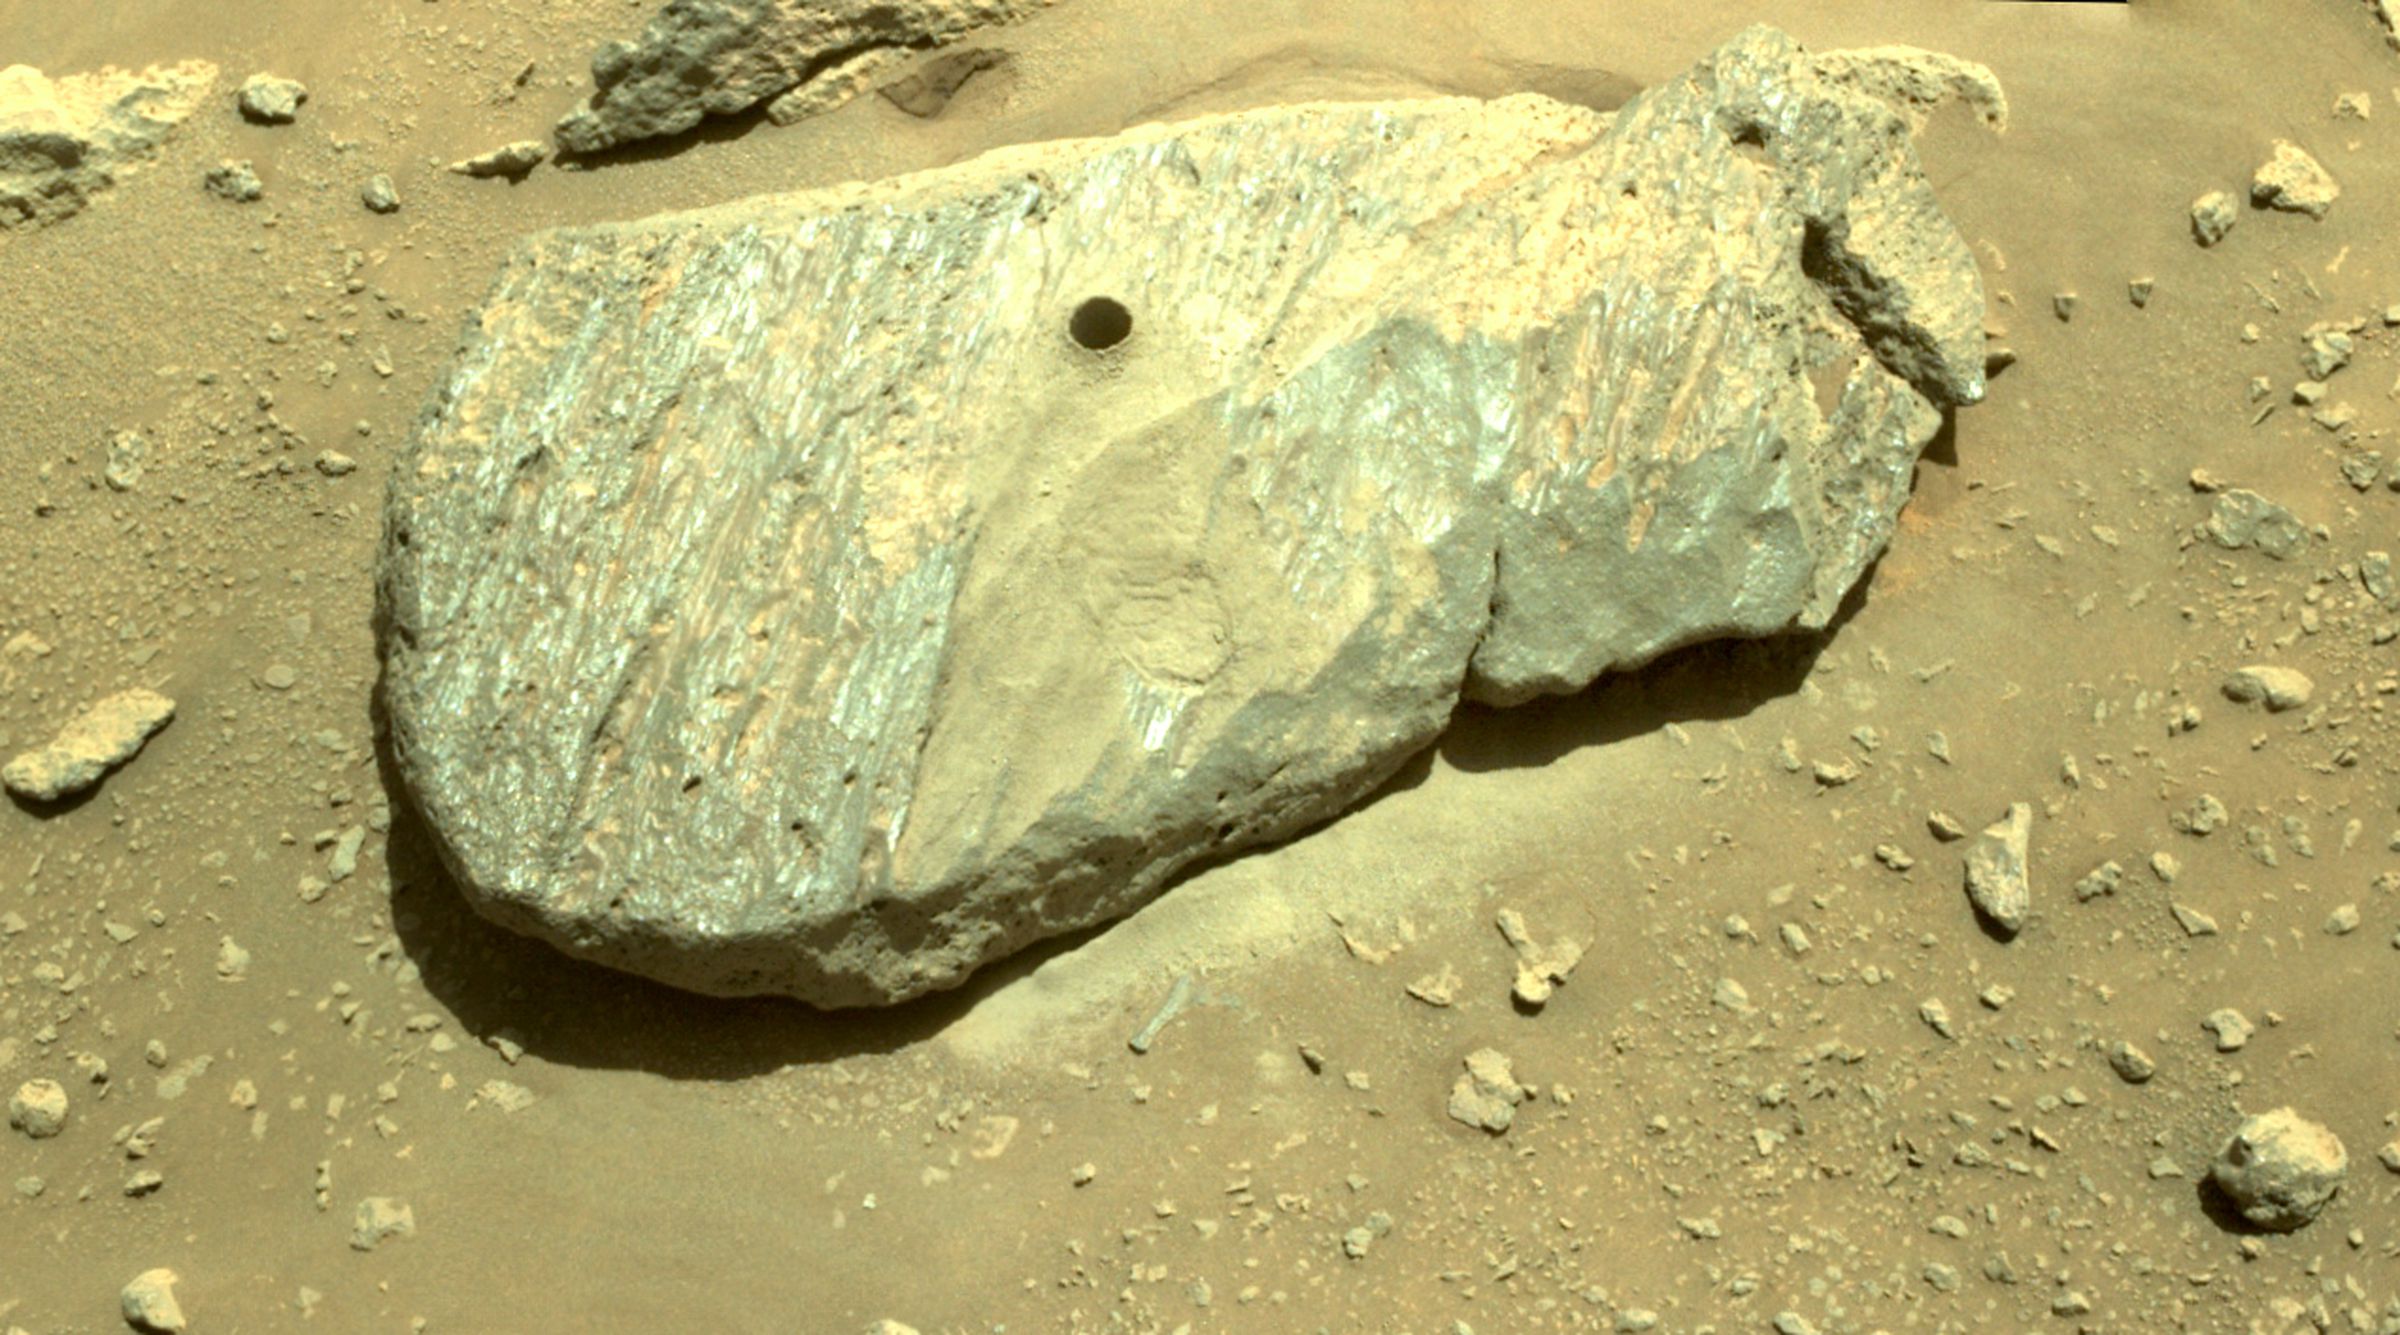 “Rochette,” the rock scientists elected as Perseverance’s drilling target, is left forever with a tiny hole where the rover extracted a rock sample.